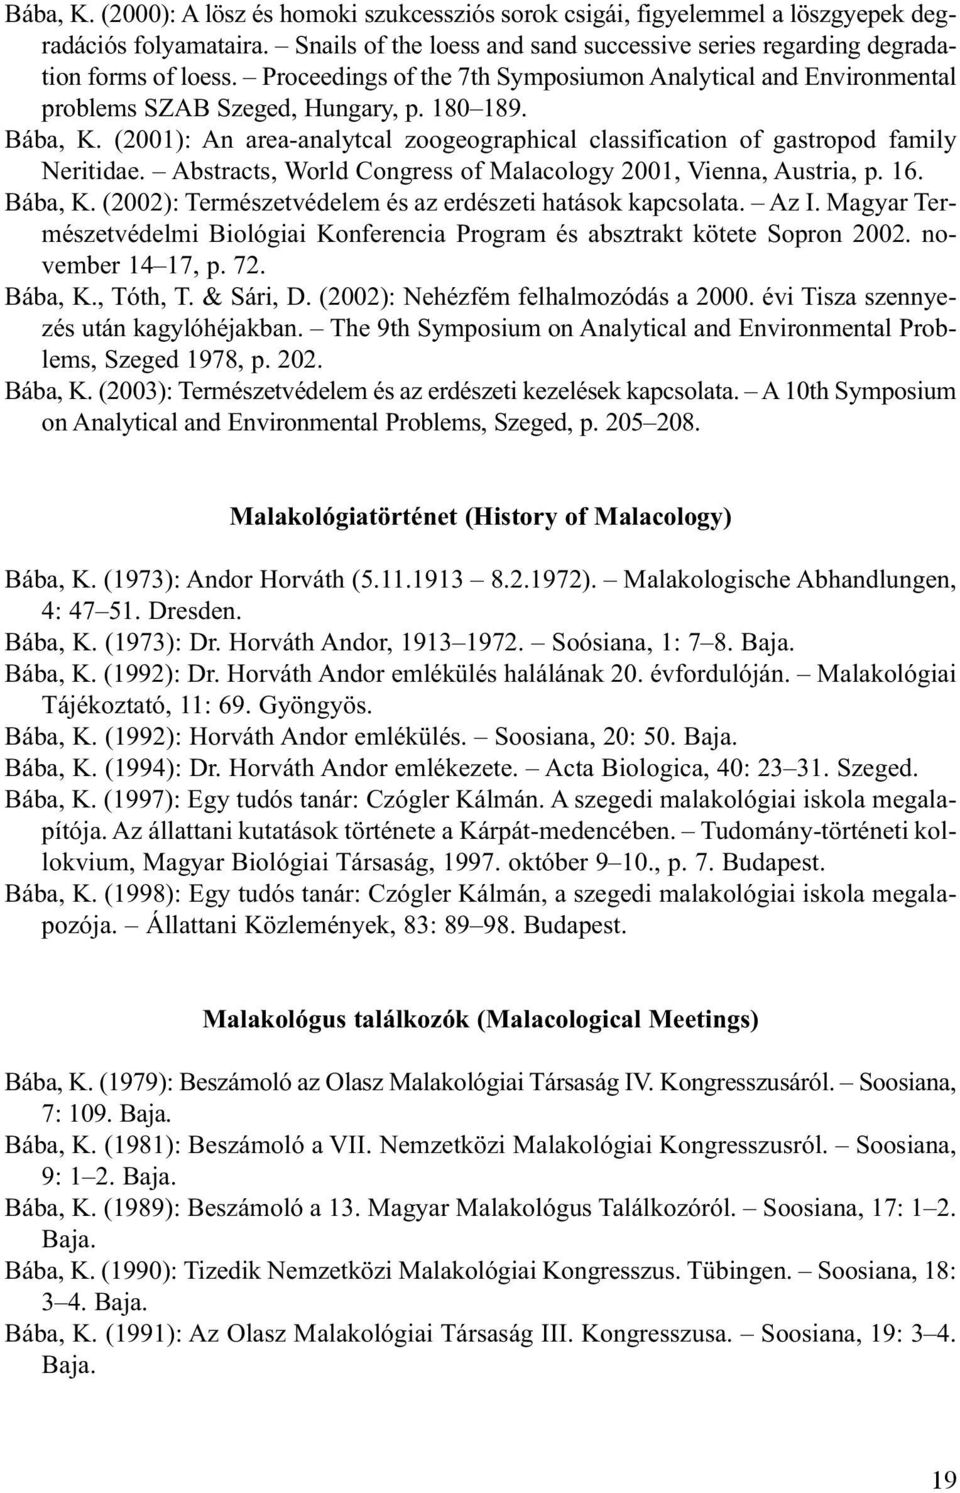 (2001): An area-analytcal zoogeographical classification of gastropod family Neritidae. Abstracts, World Congress of Malacology 2001, Vienna, Austria, p. 16. Bába, K.